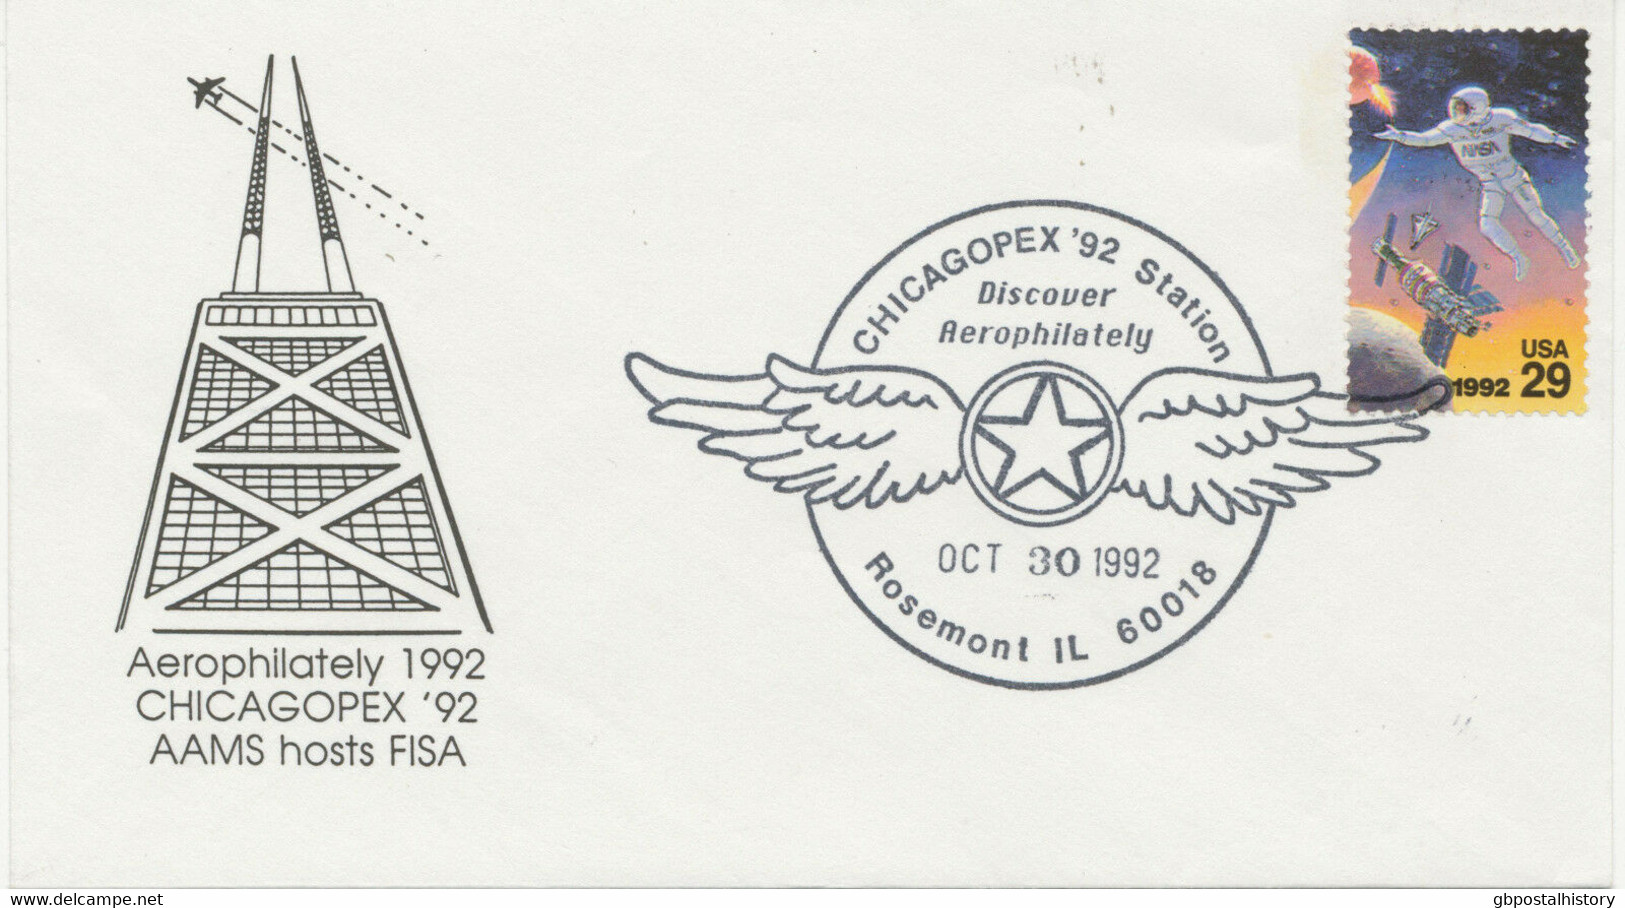 USA 1992 CHICAGOPEX `92 Station / Discover Aerophilately / OCT 30 1992 / Rosemon - 3c. 1961-... Lettres